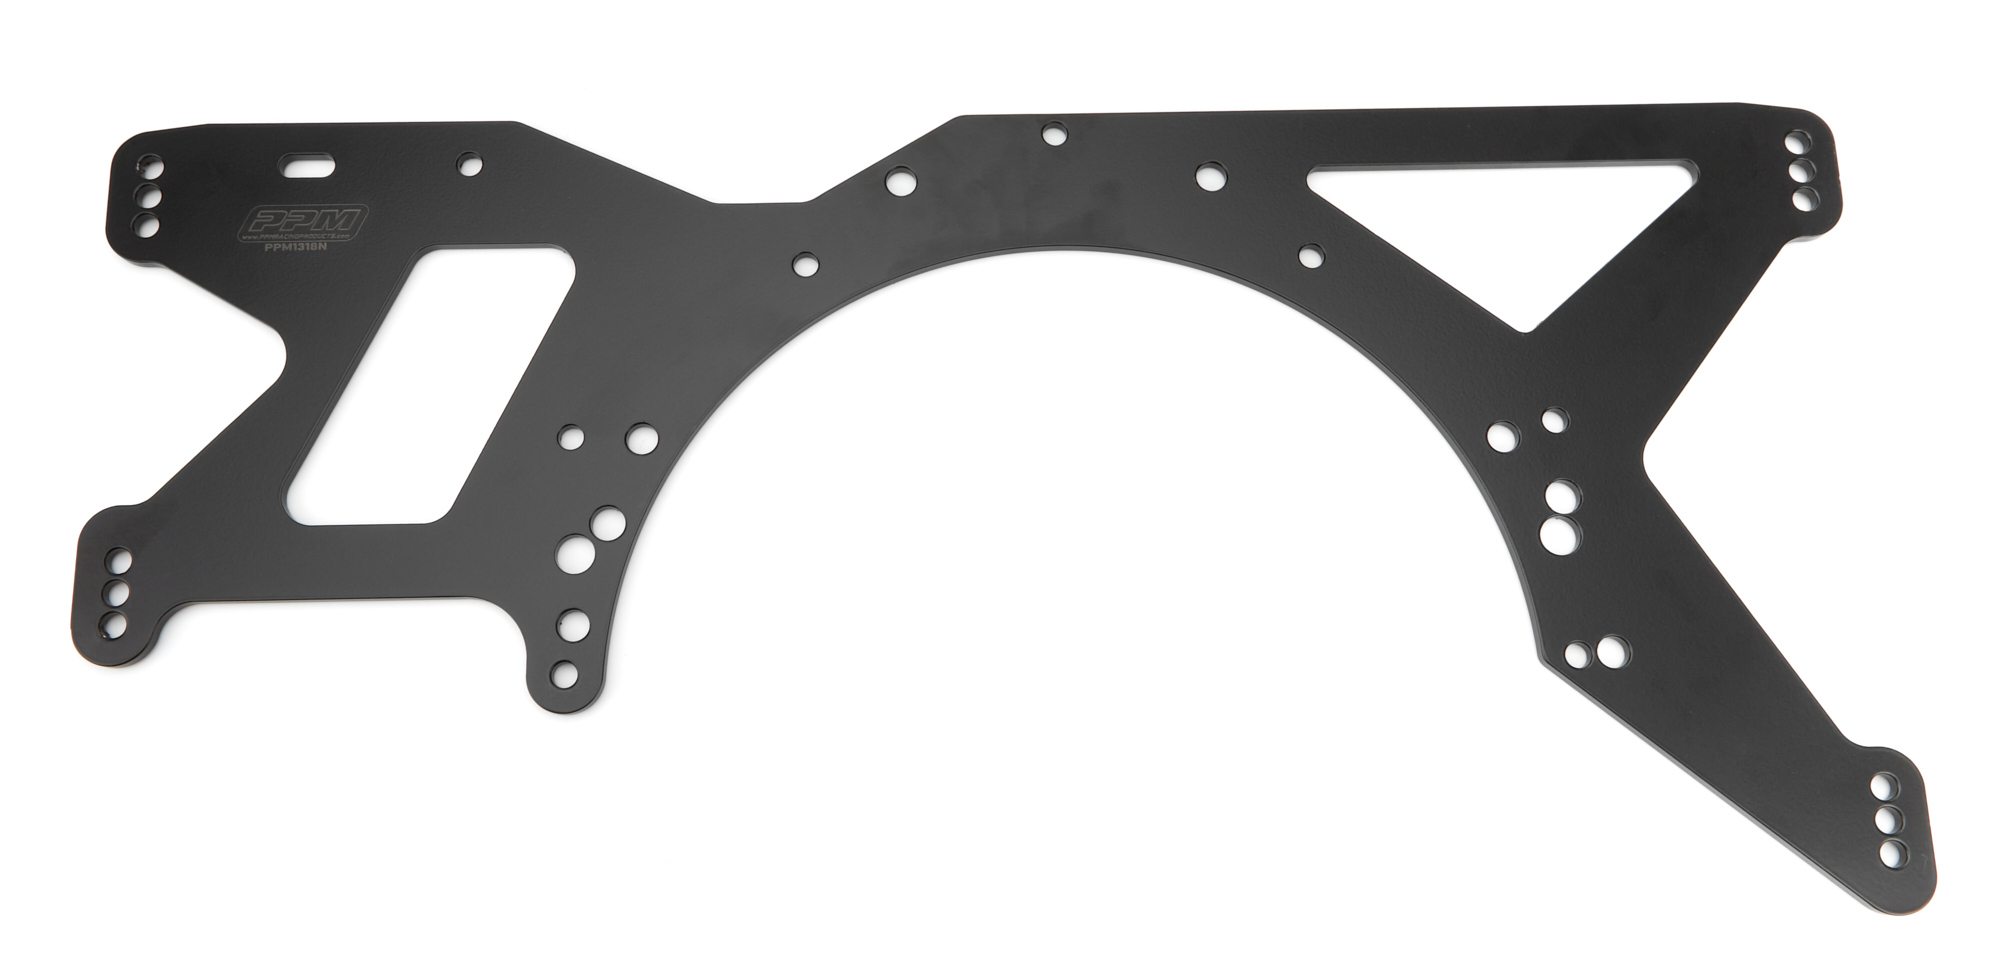 PPM Racing 1318N Motor Plate, Mid, 1/4 in Thick, Aluminum, Black Powder Coat, Small Block Chevy / Small Block Ford, Rocket Chassis 2018, Each